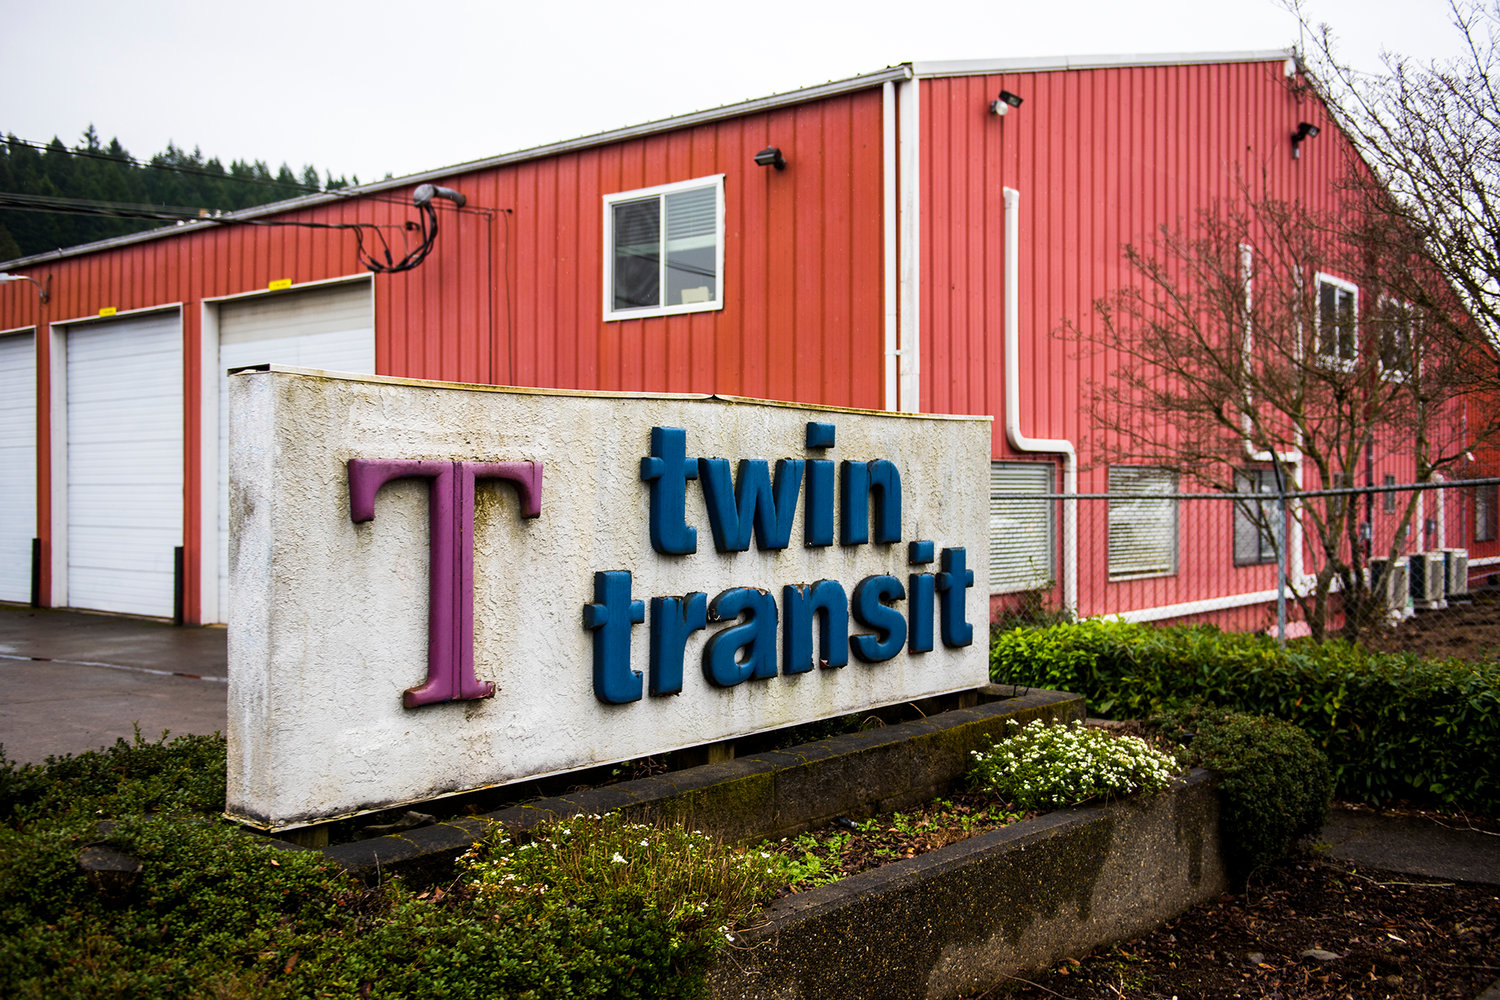 The Twin Transit Administrative Building is located at 212 E. Locust St, near downtown Centralia.